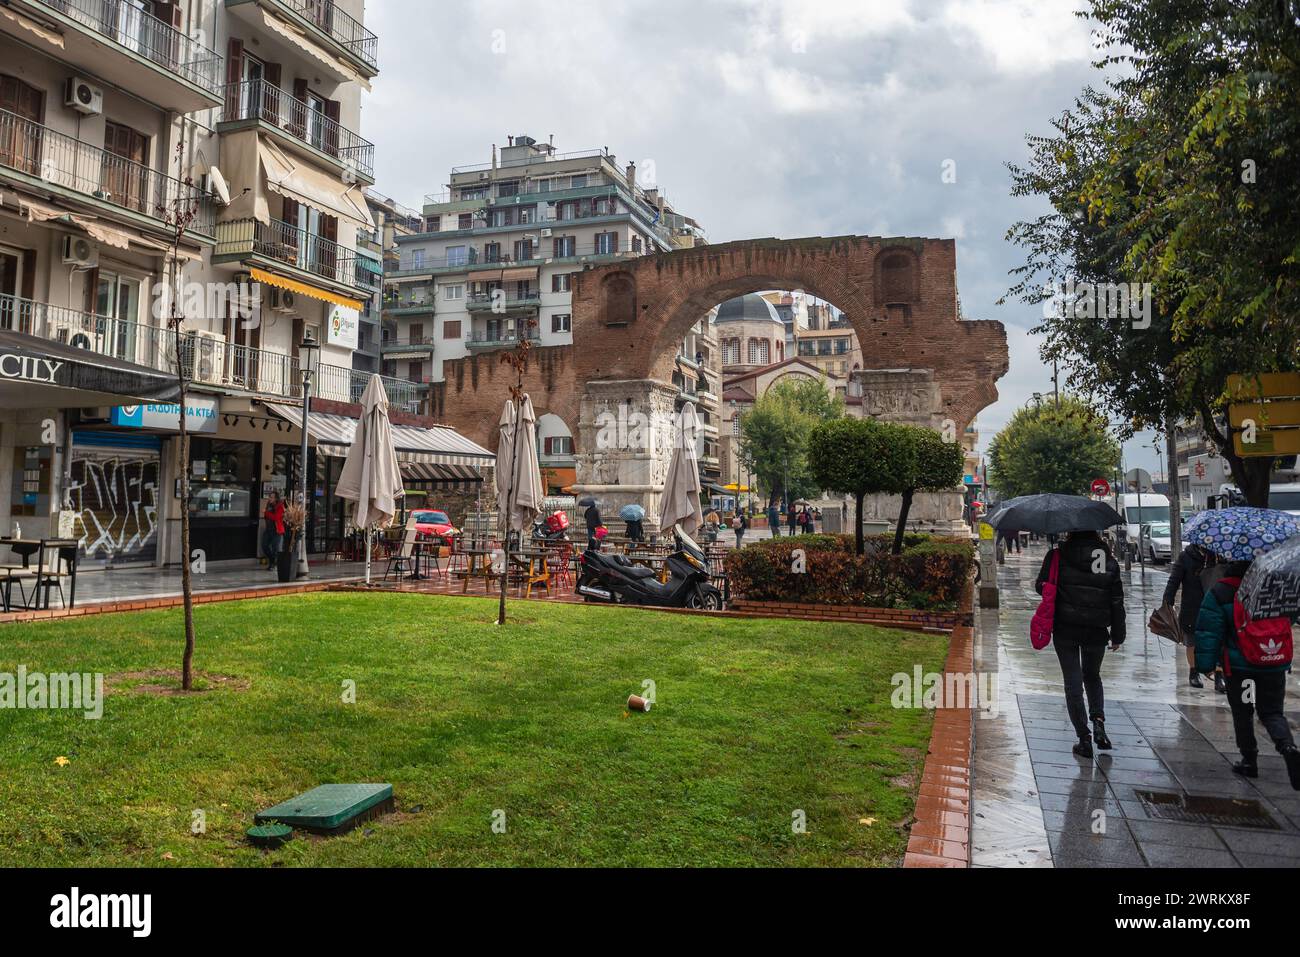 Arch of Galerius triumphal arch also known as Kamara in Thessaloniki city, Greece. Church of Panagia Dexia on background Stock Photo